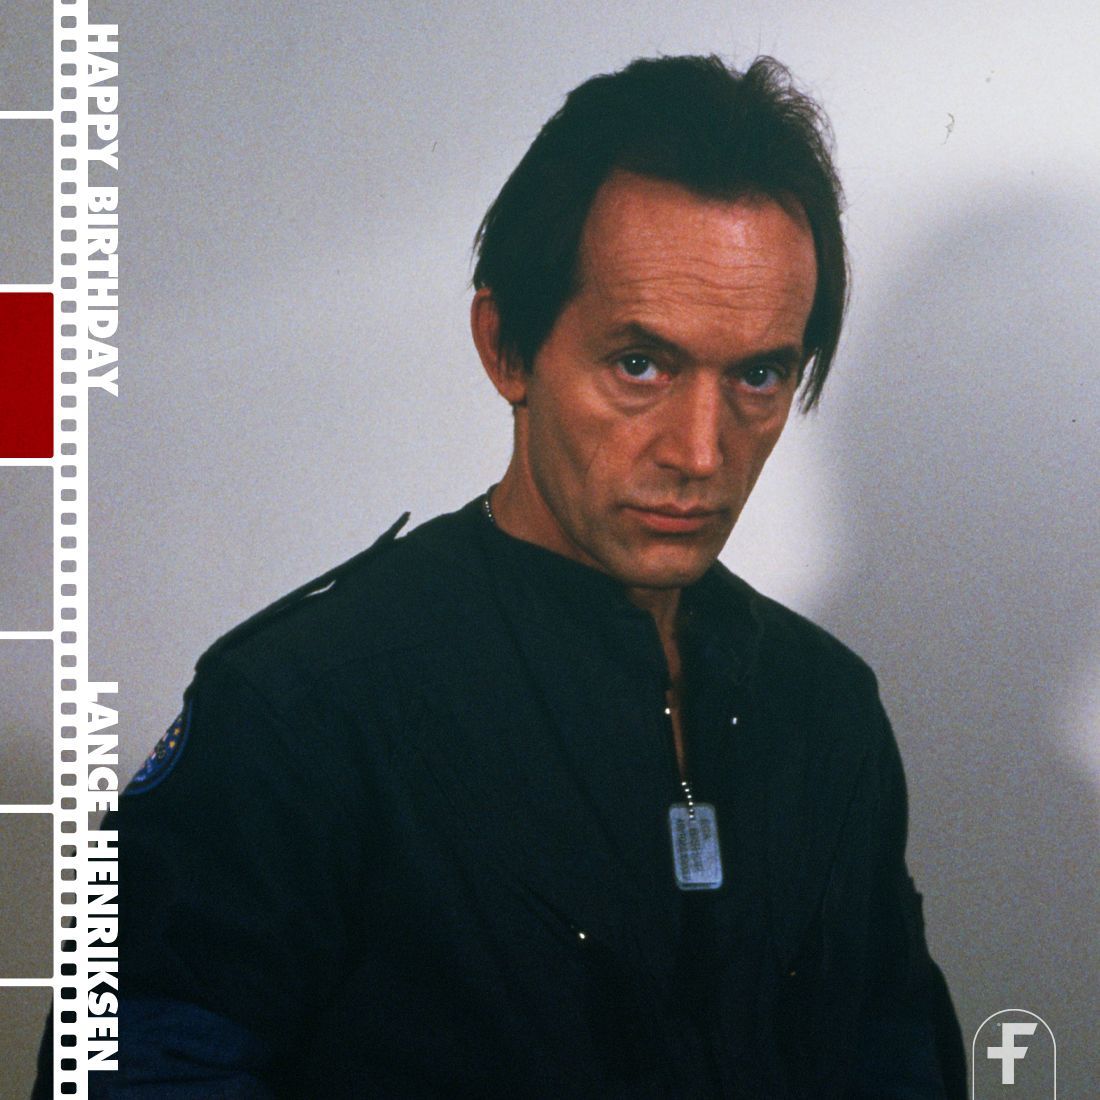 Happy birthday to legendary actor Lance Henriksen, known by genre fans for his work in THE TERMINATOR, NEAR DARK, PUMPKINHEAD, CLOSE ENCOUNTERS OF THE THIRD KIND, ALIENS, ALIEN 3, ALIEN VS. PREDATOR, and THE QUARRY videogame.